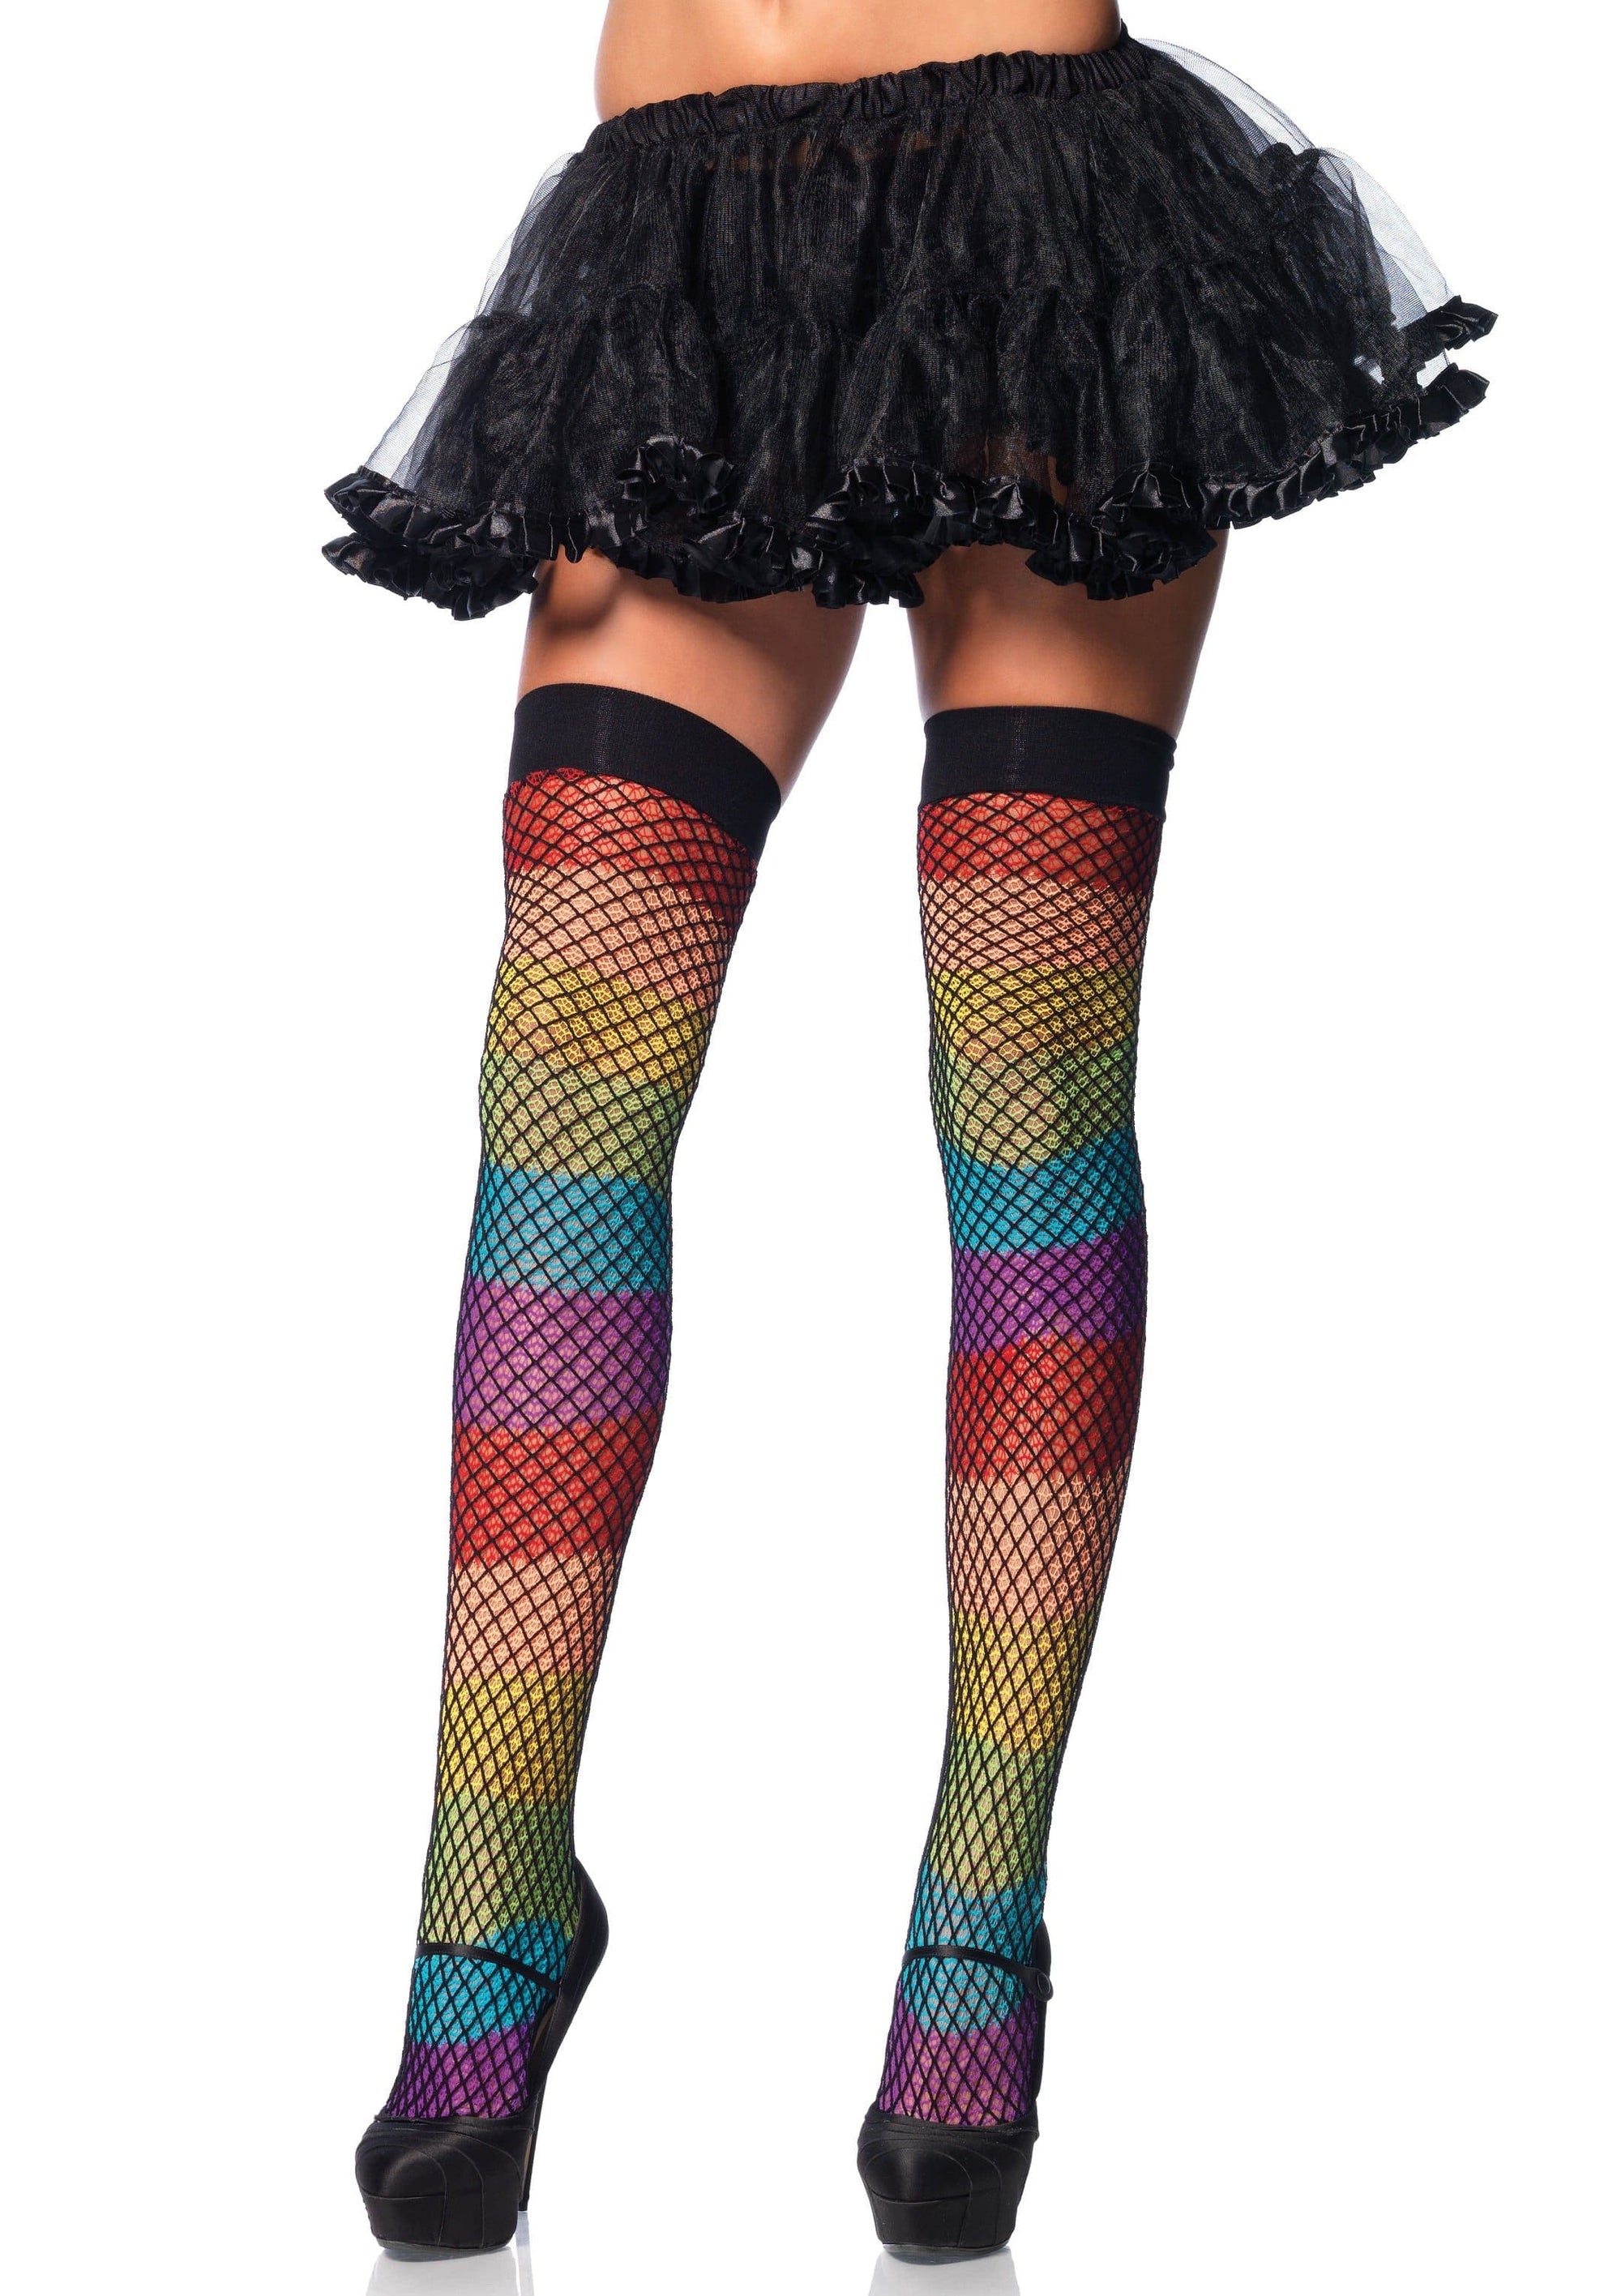 rainbow thigh highs with fishnet overlay one size